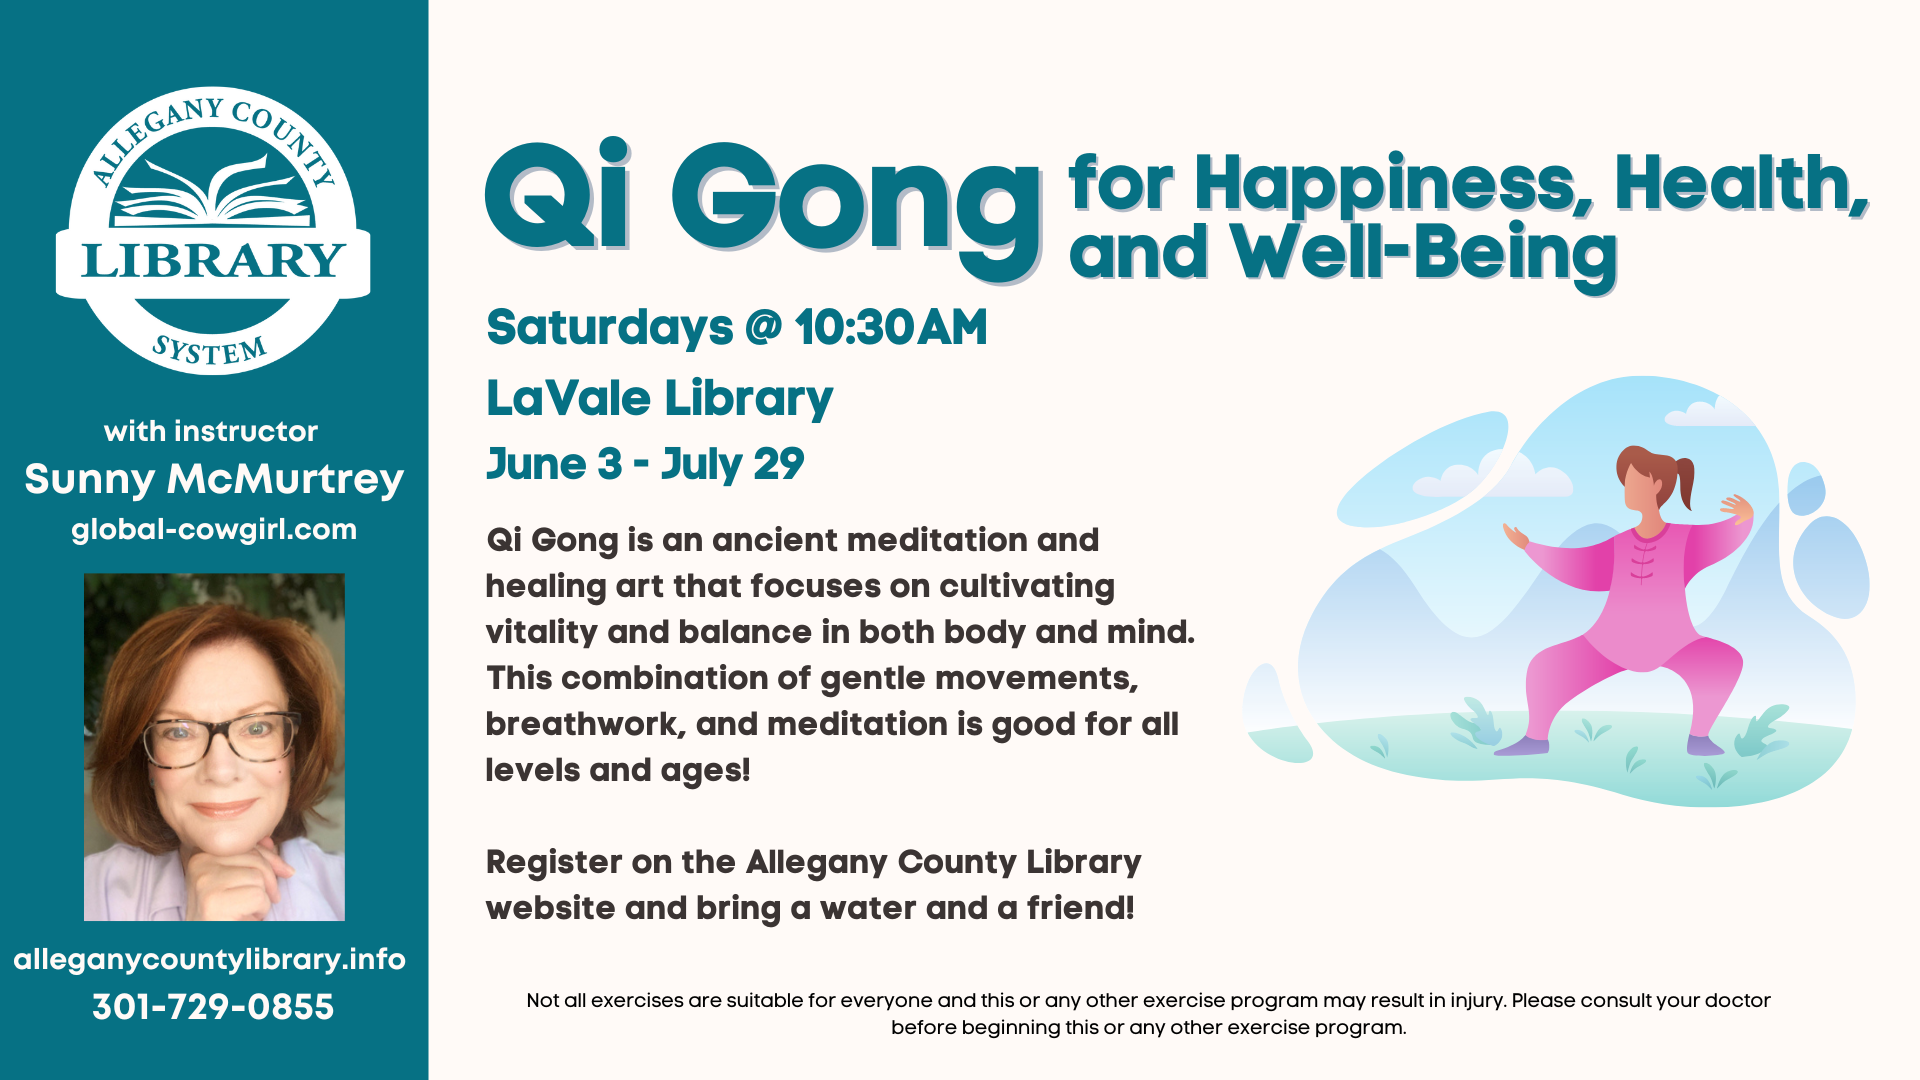 Qi Gong event details